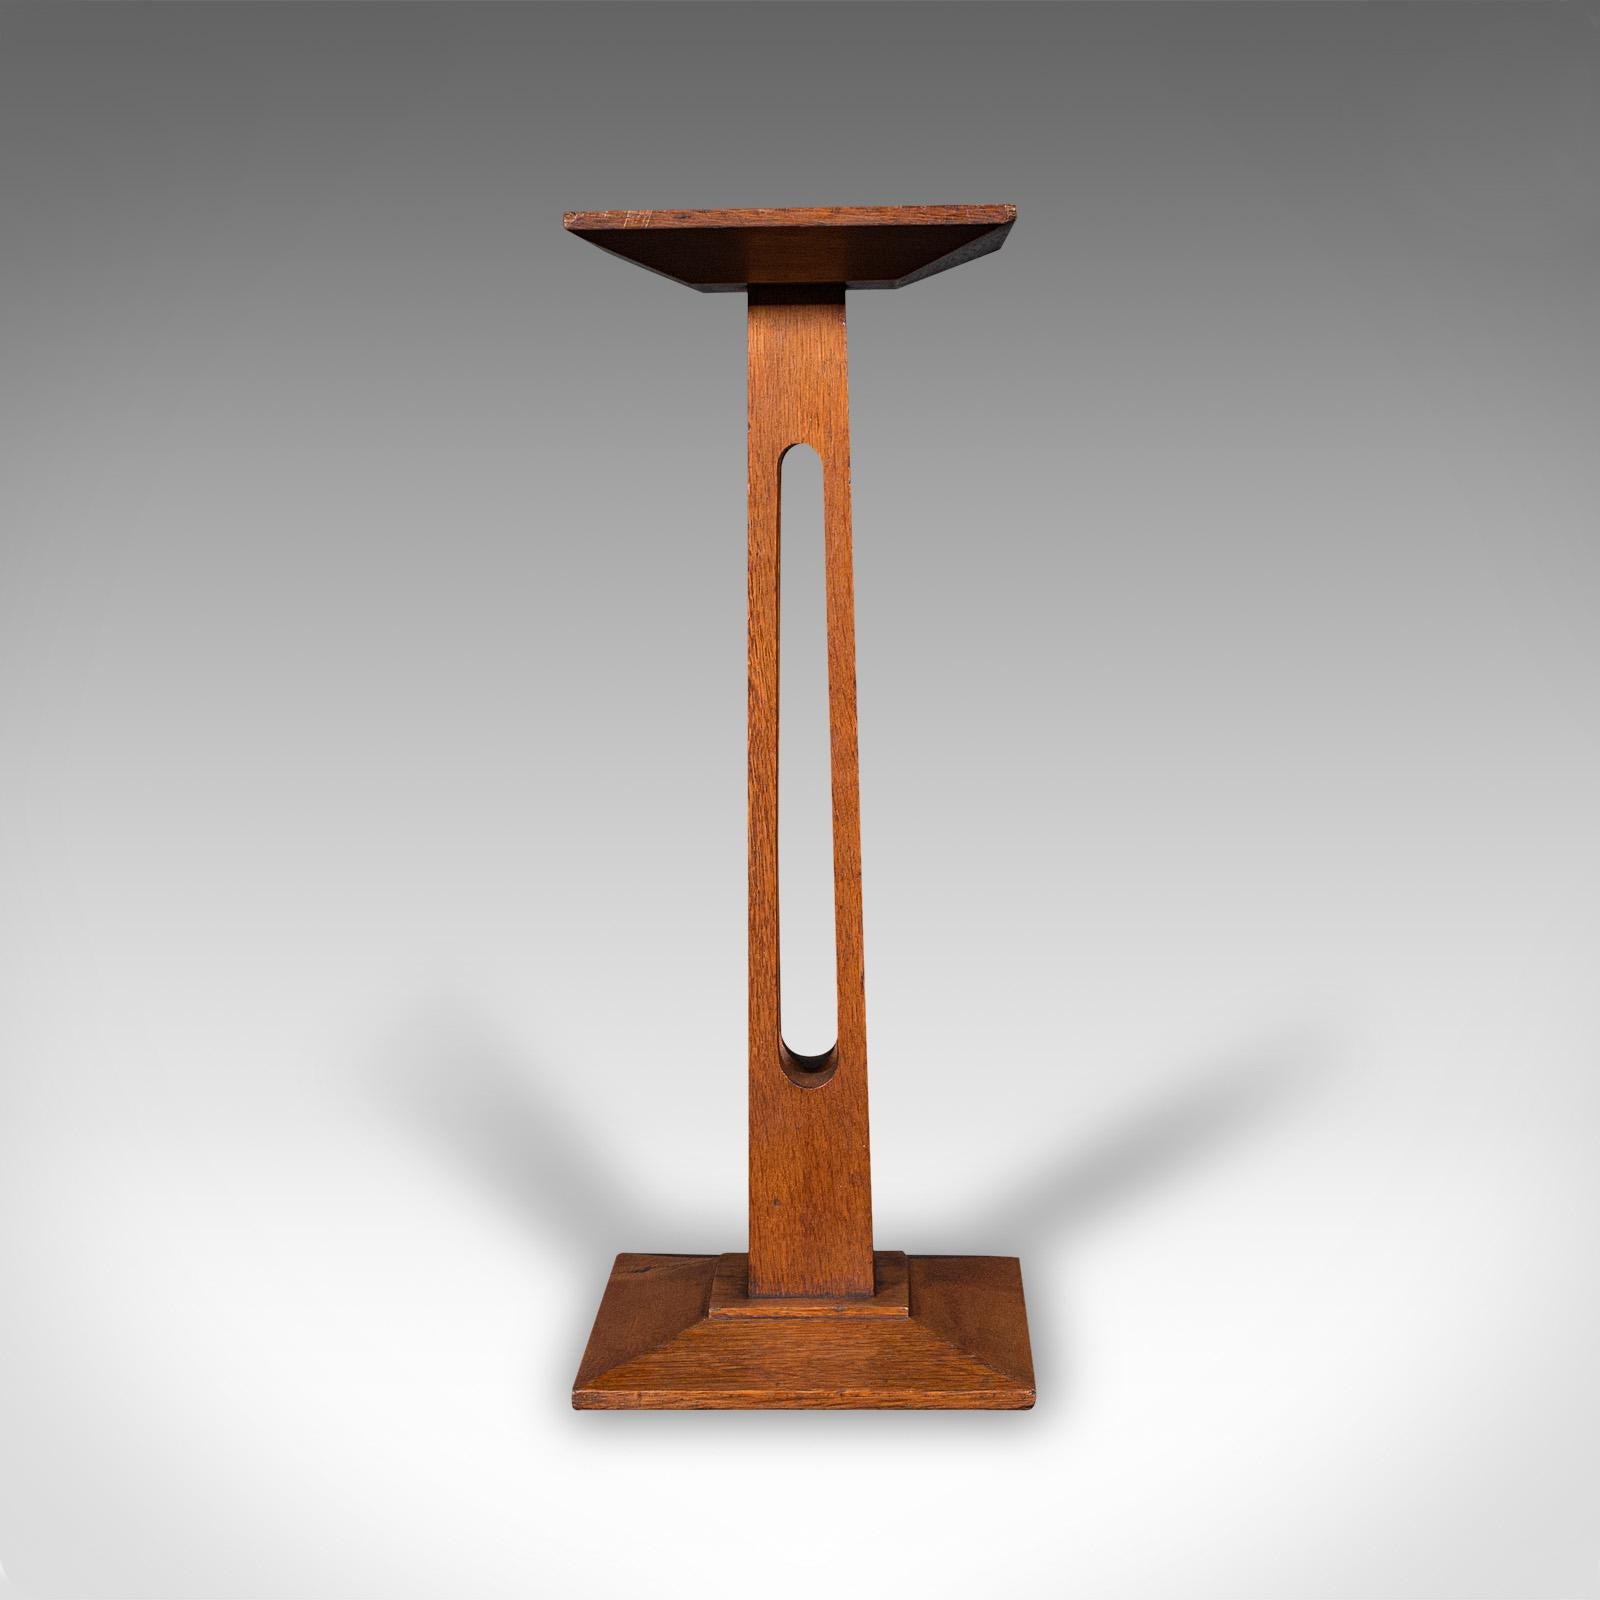 This is a small antique bust stand. An English, oak jardiniere or torchere column, dating to the mid Victorian period, circa 1880.

Gracefully presented stand, ideal for displaying a small portrait bust
Displays a desirable aged patina and in good